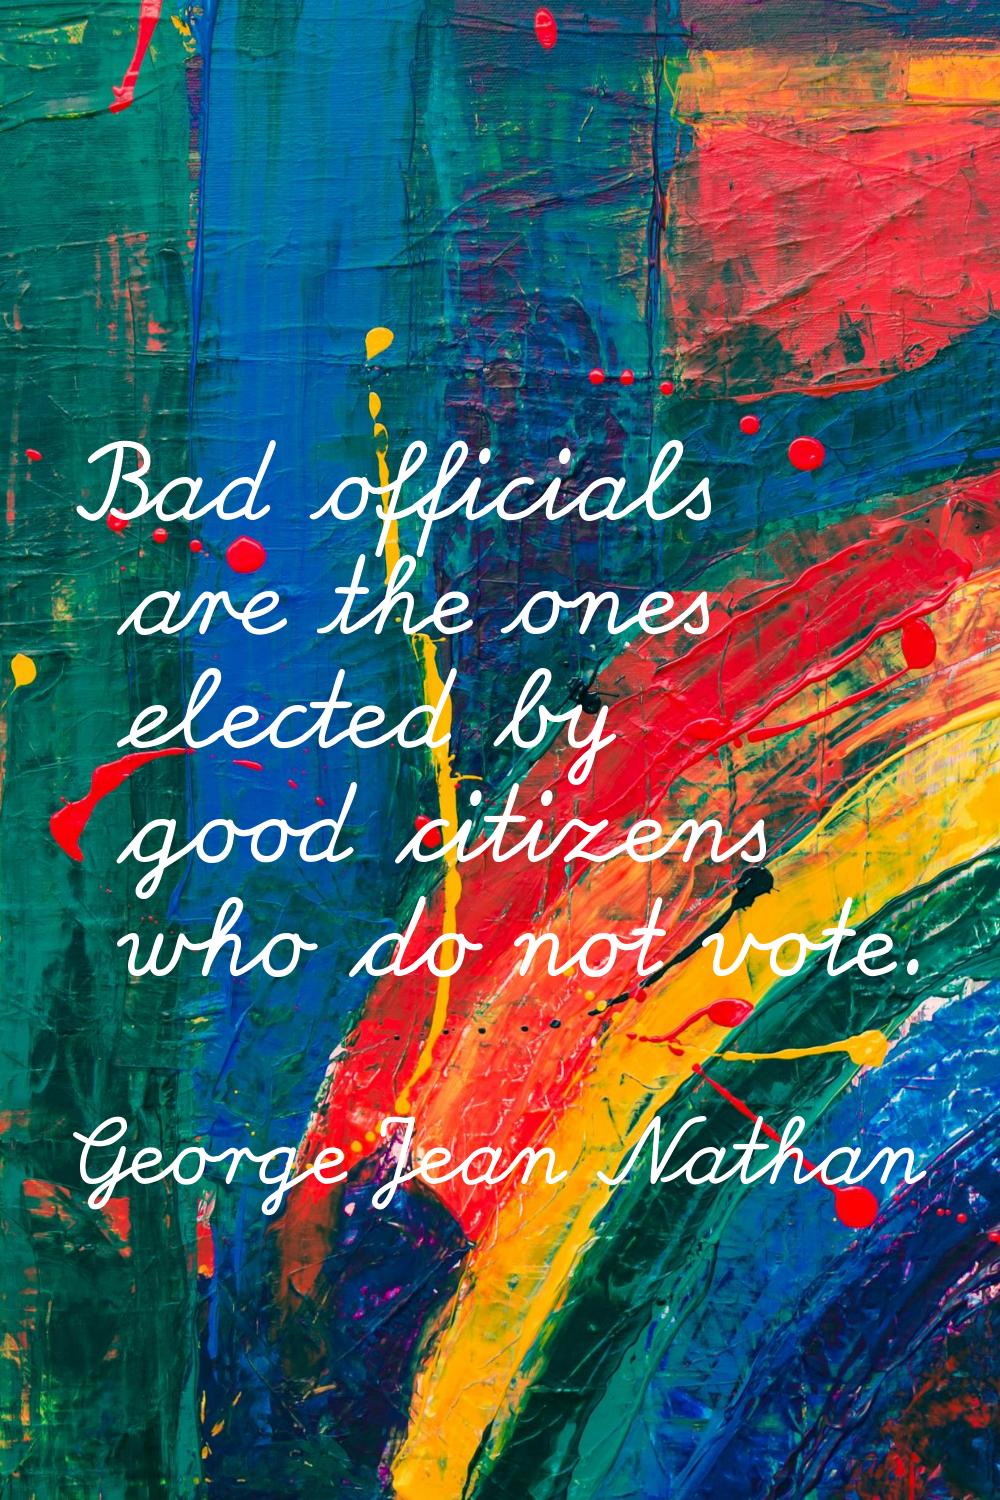 Bad officials are the ones elected by good citizens who do not vote.